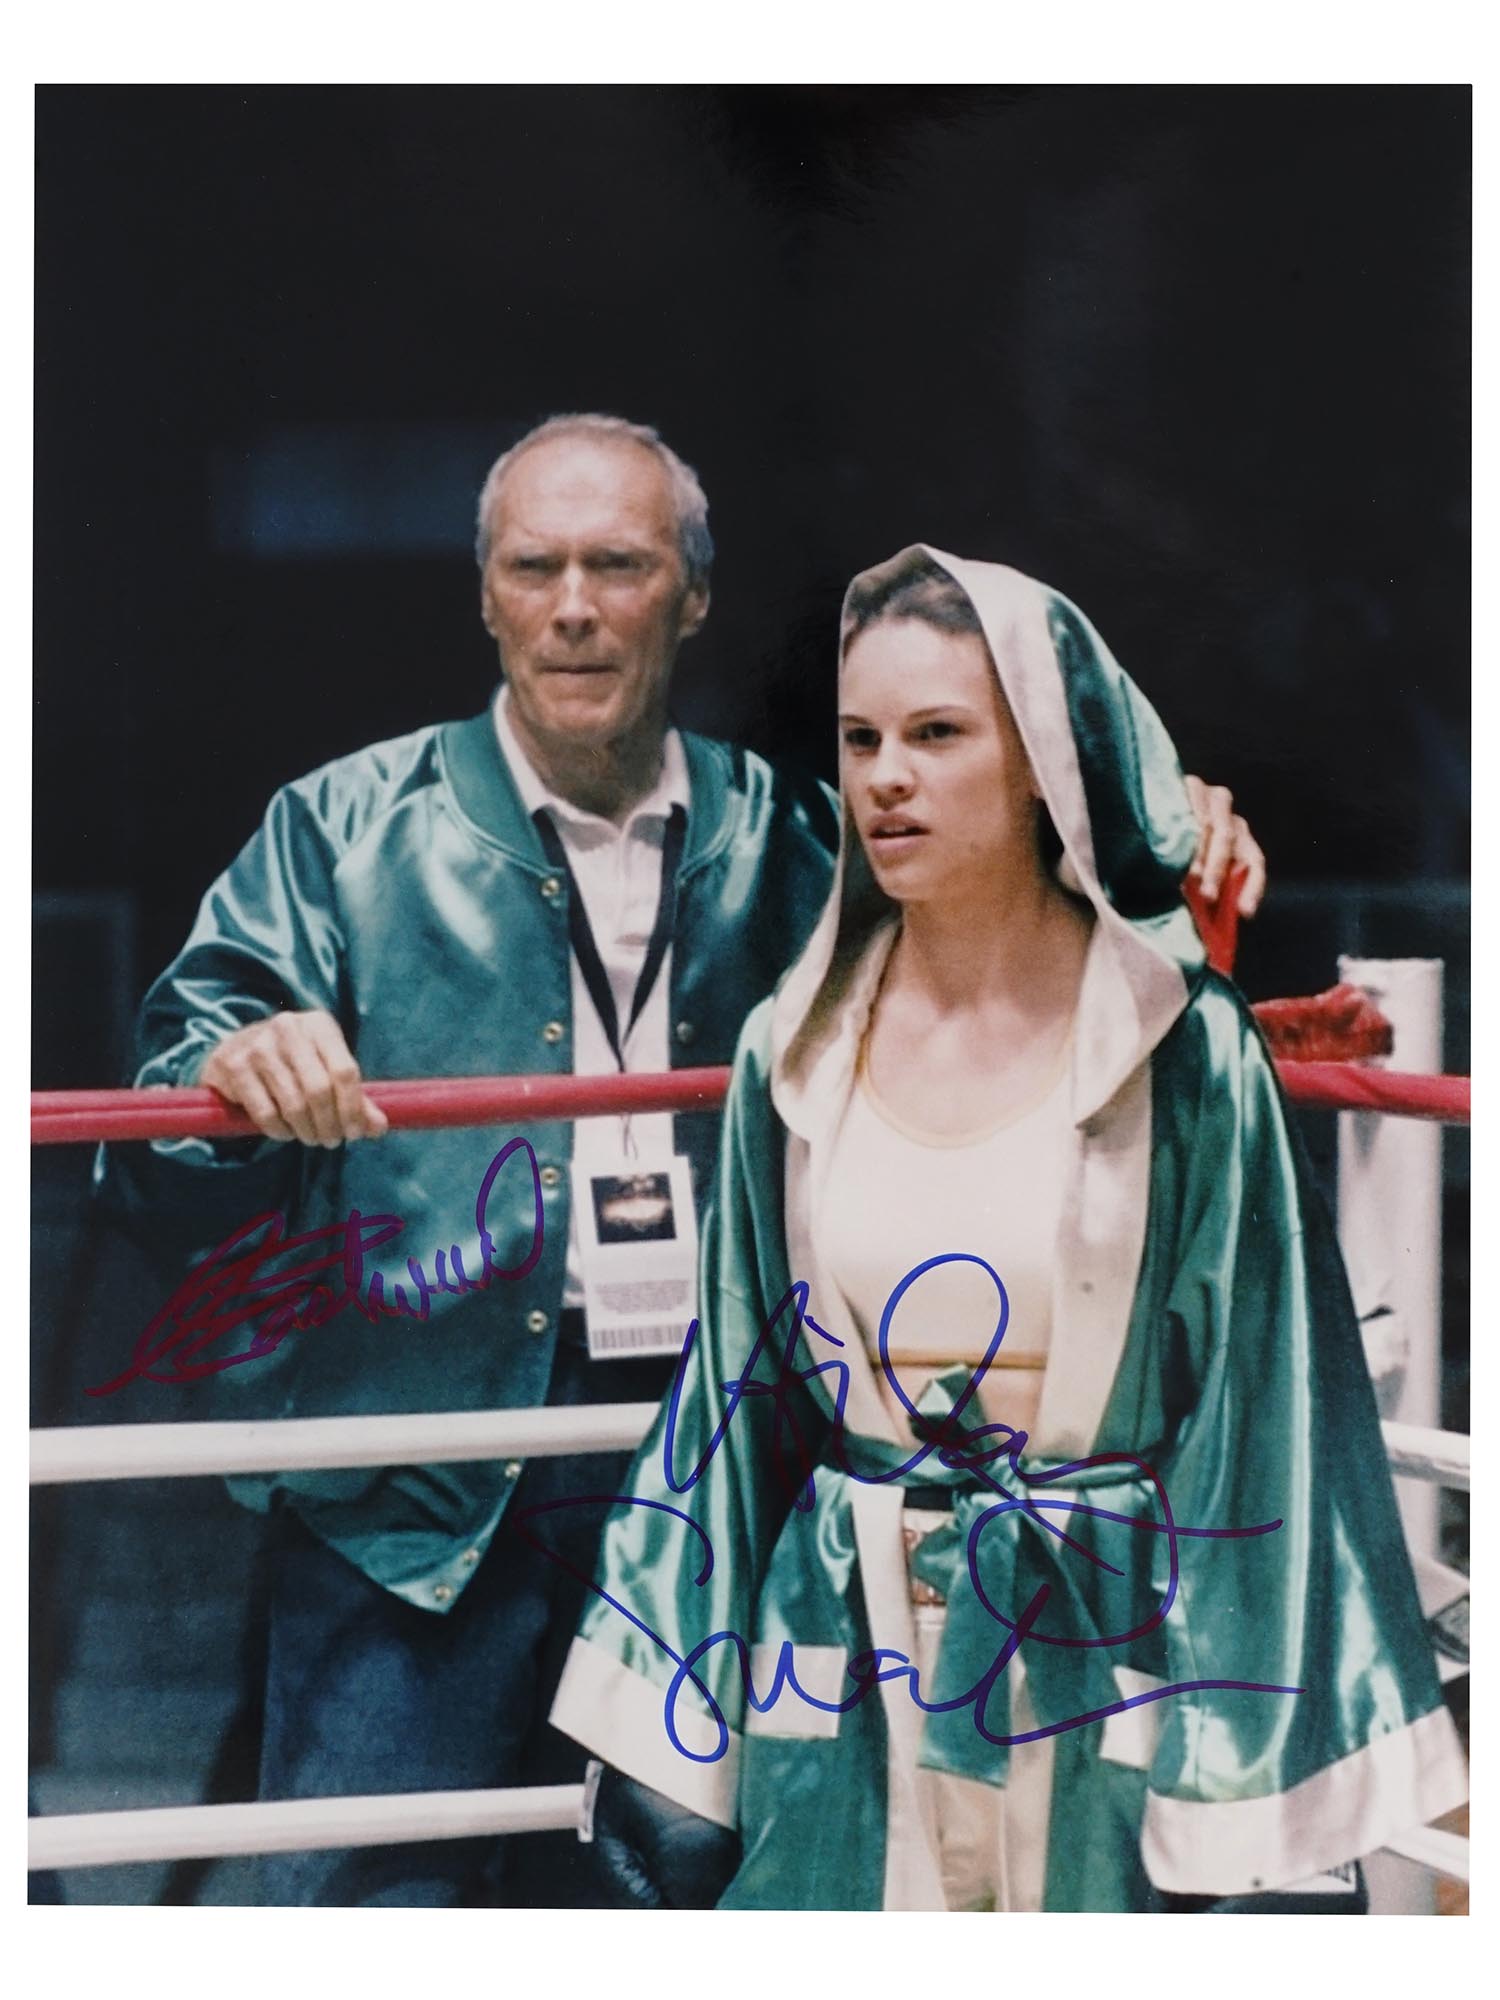 CLINT EASTWOOD AND HILARY SWANK AUTOGRAPHED PHOTO PIC-2